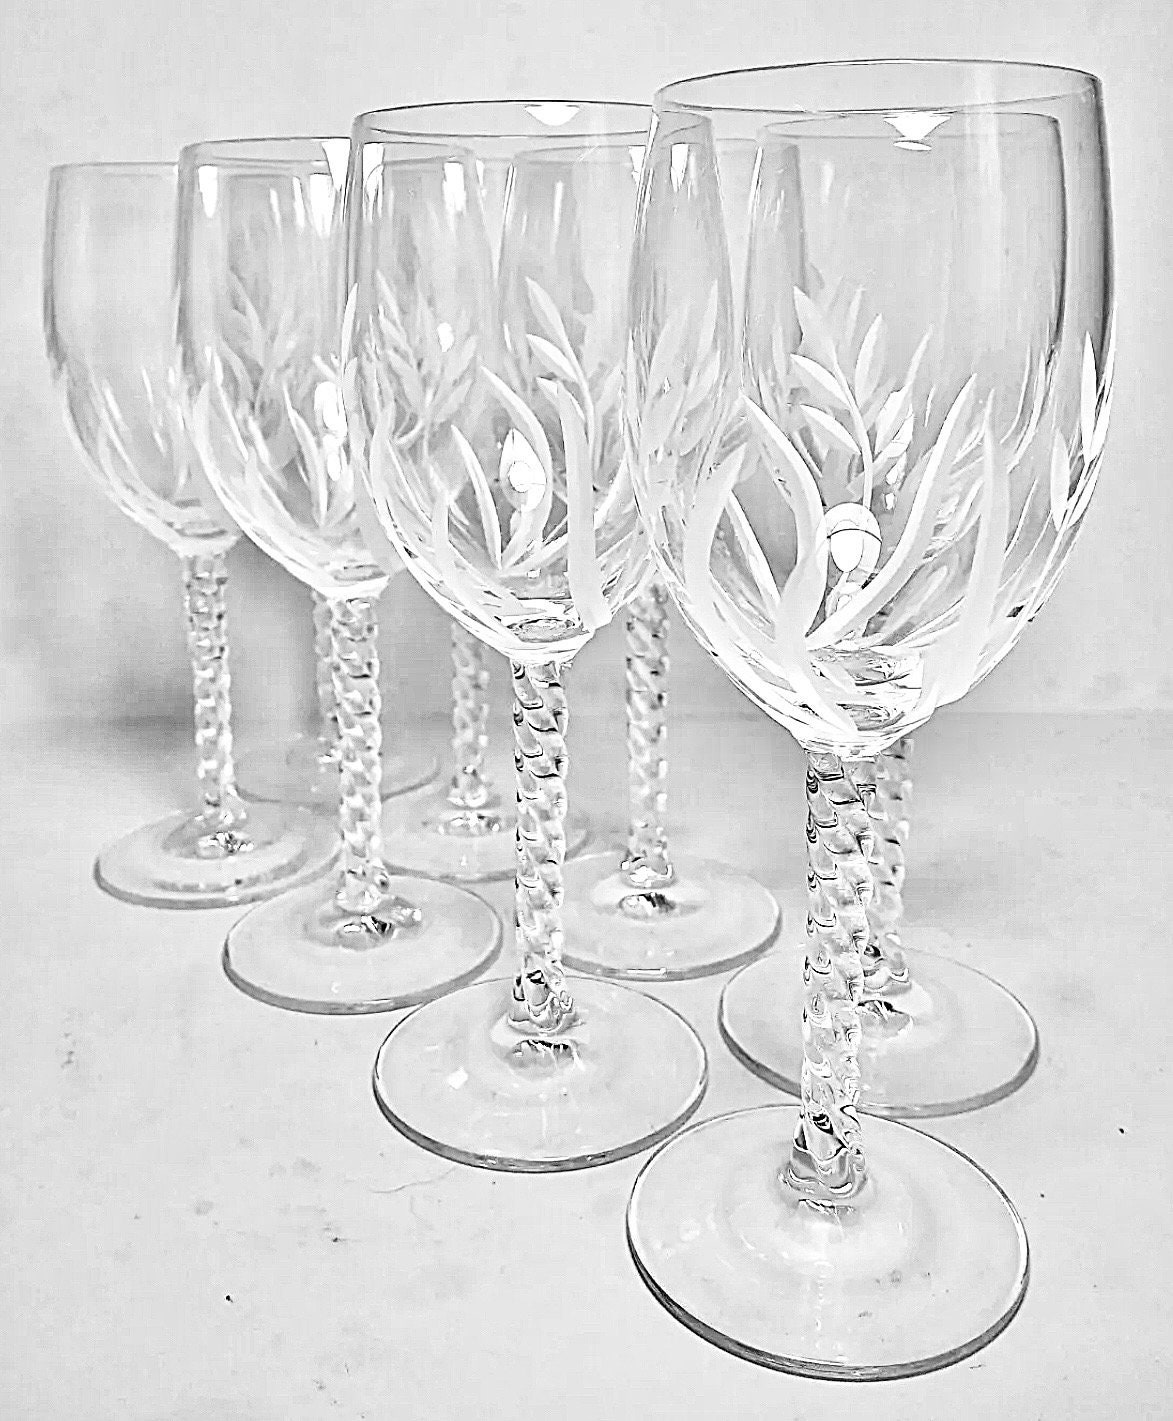 8 colored wine glasses twisted stems - 1970s – Chez Pluie